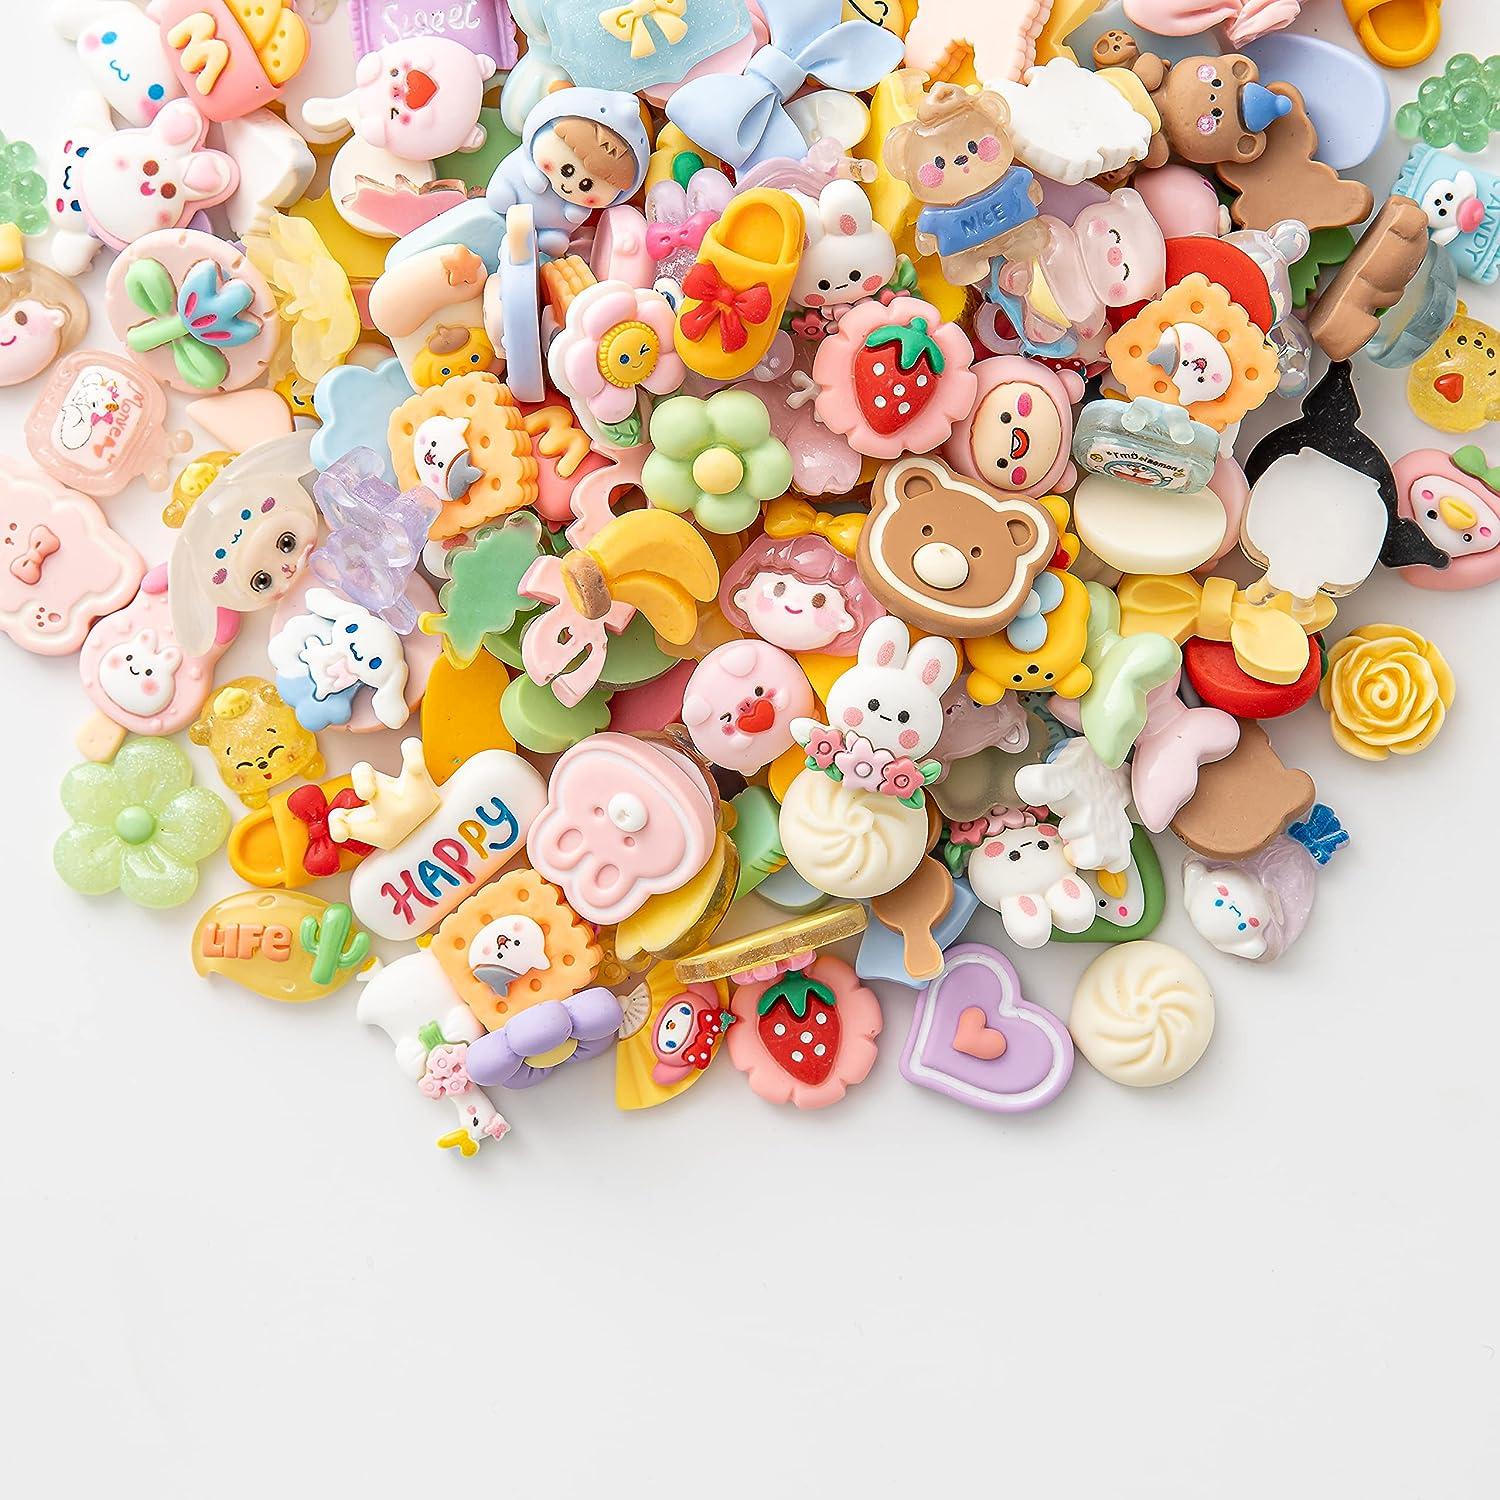 Slime Charms Cartoons Charms Cute Set - Mixed Lot Assorted Kawaii Charms  Resin Flatback for DIY Crafts  Making,Decorations,Scrapbooking,Embellishments,Hair Clip 25pcs - Yahoo  Shopping